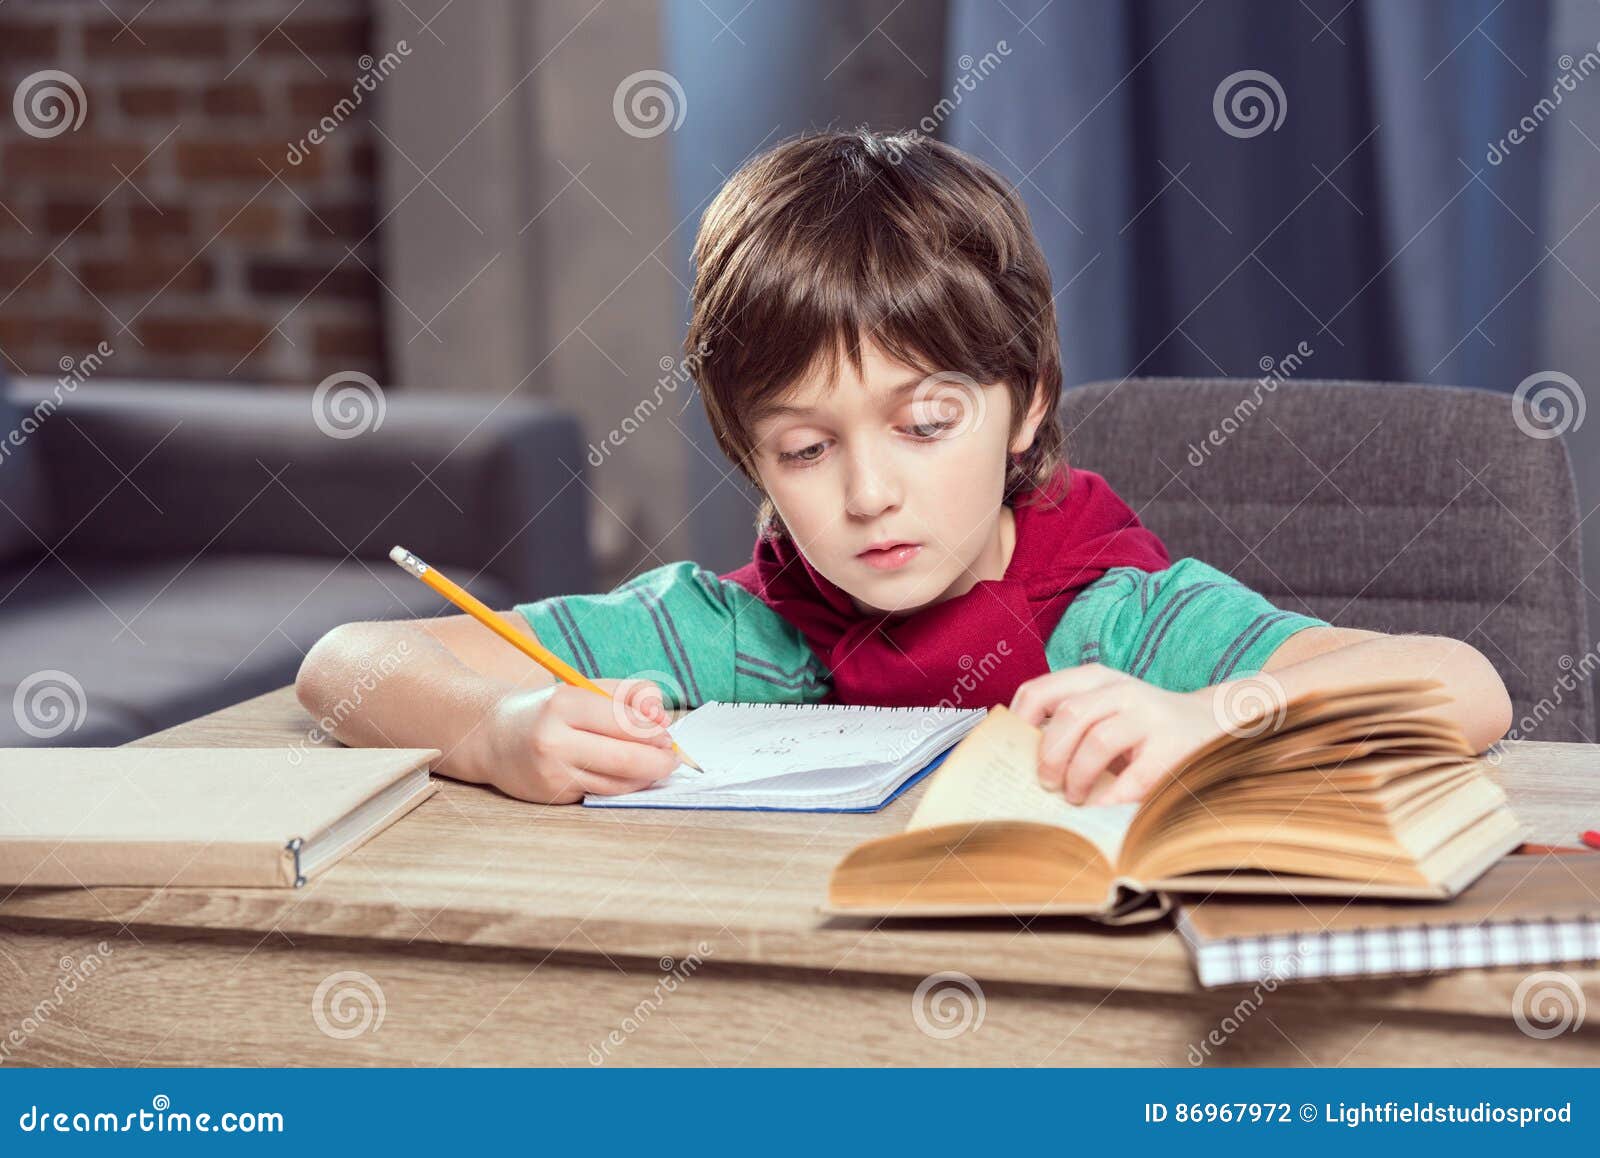 Concentrated Boy Sitting At Table And Doing Homework Stock ...